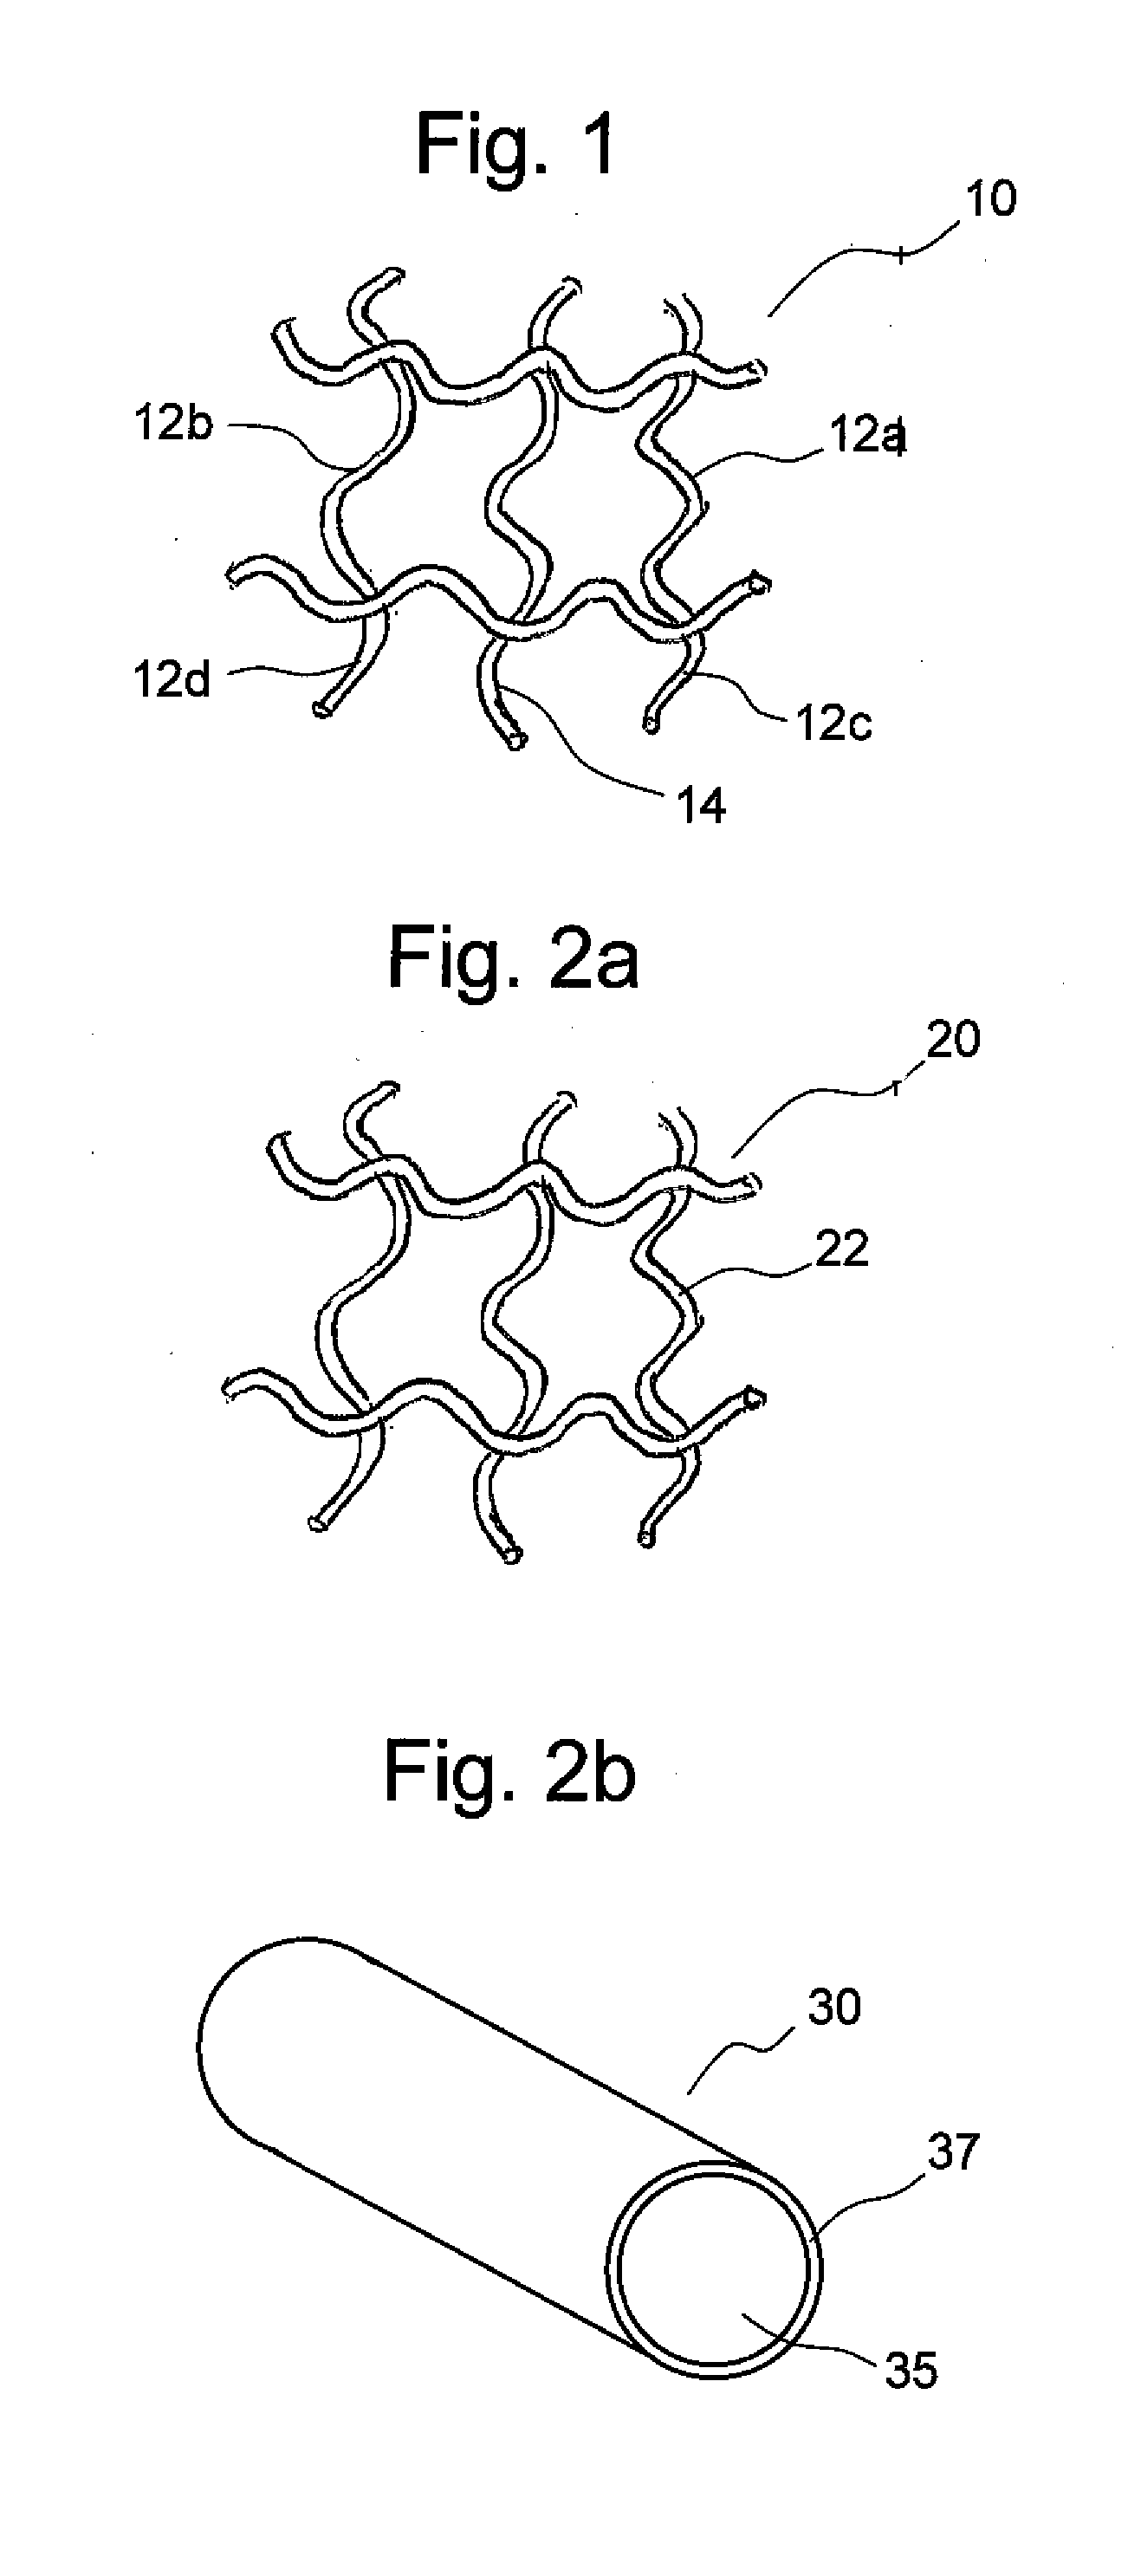 Conductive and degradable implant for pelvic tissue treatment